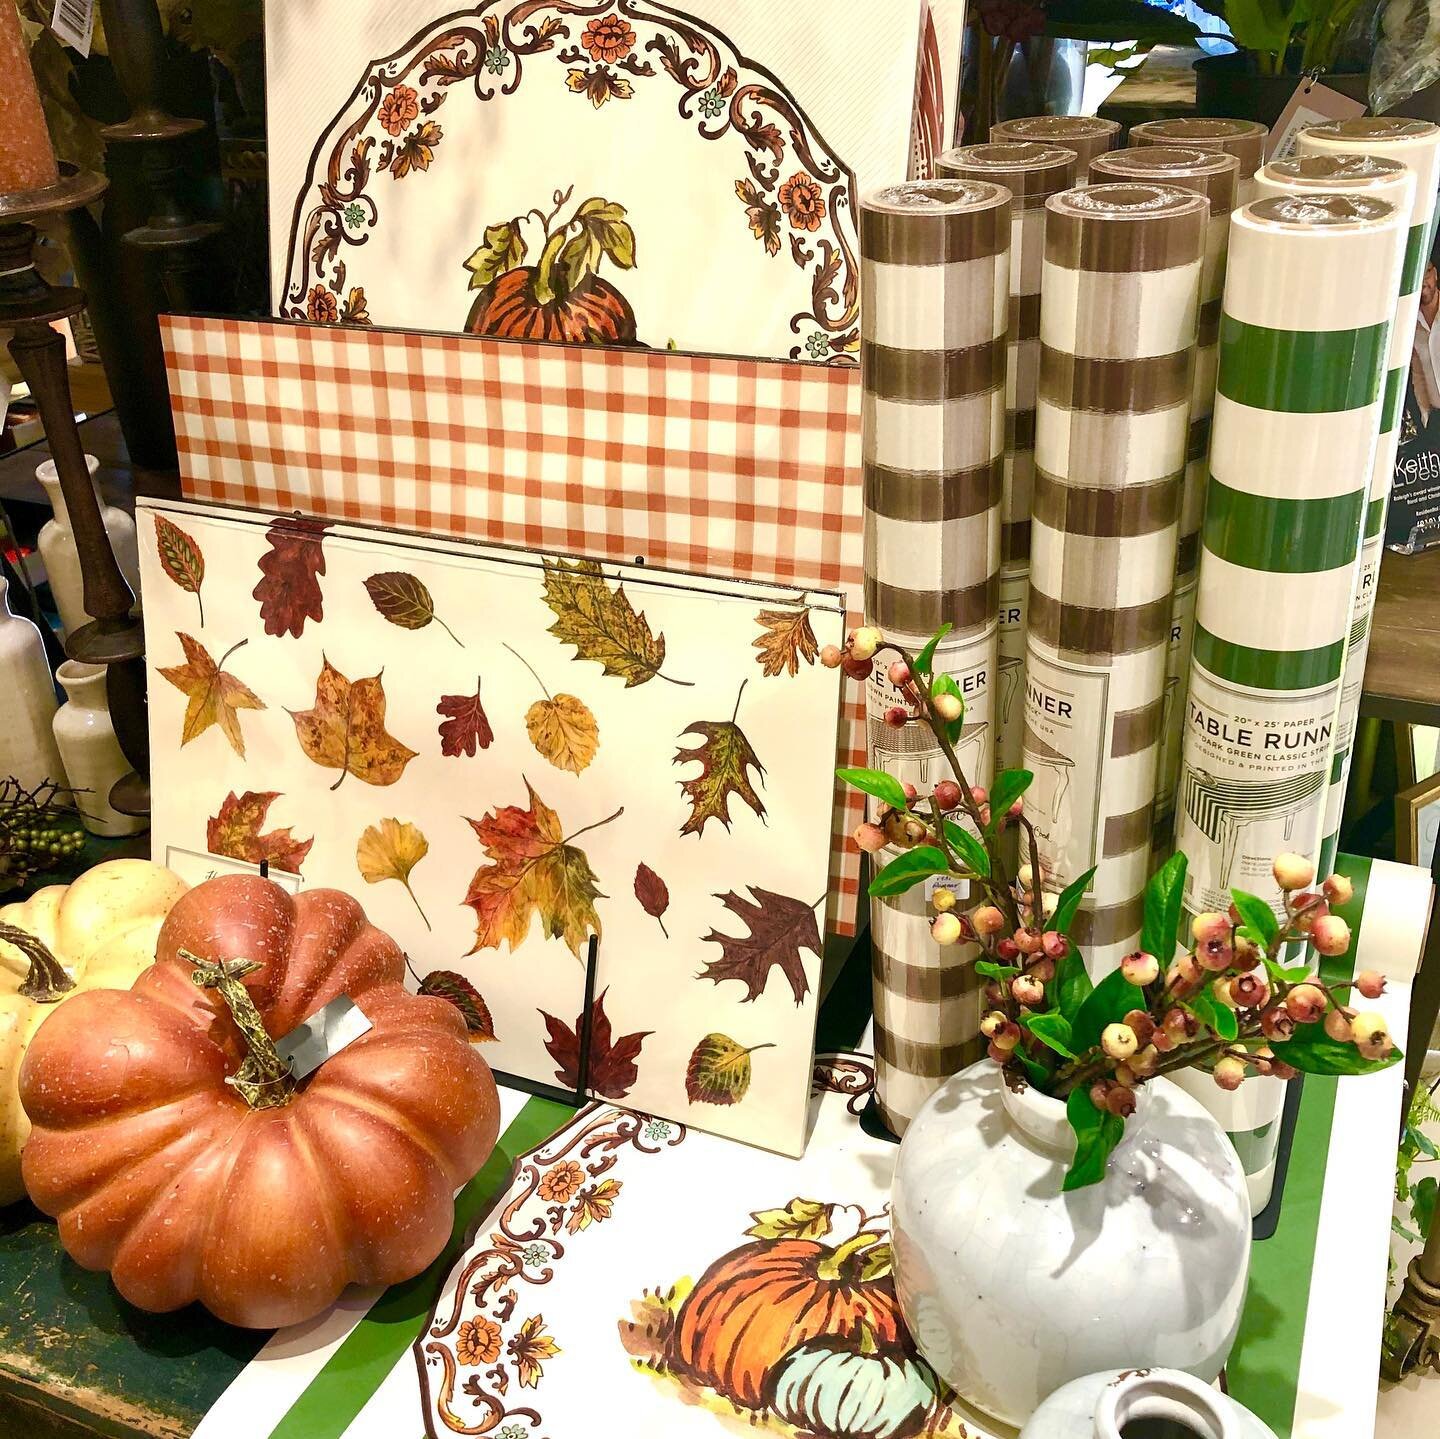 Fall paper placemats and runners are must haves @lloydandlady boutiques.  Shop with us Sunday 1-5pm, during the last day of our Fall Open House!
.
.
.
#fall #falldecor #falldecorations #placemats #tabledecor #tablesetting #tablerunner #paper #paperpl